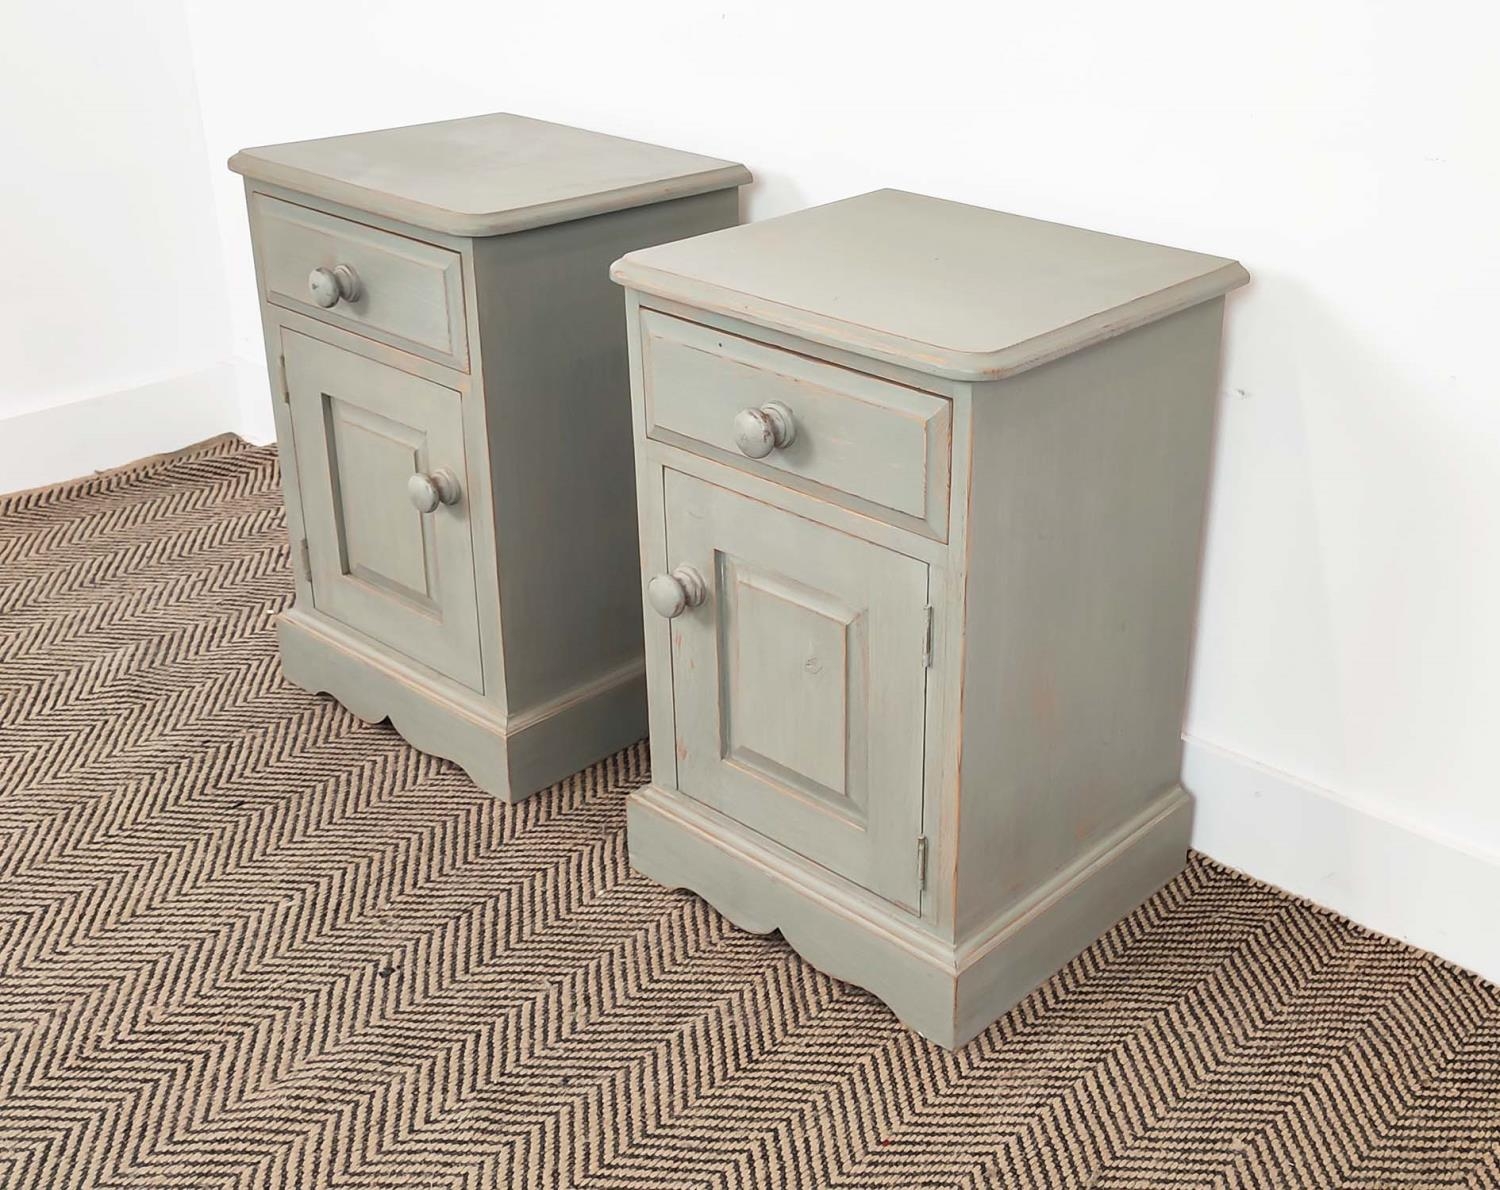 BEDSIDE CABINETS, a pair, grey painted, each with drawer and door, 60cm H x 40cm x 36cm. (2) - Image 6 of 16